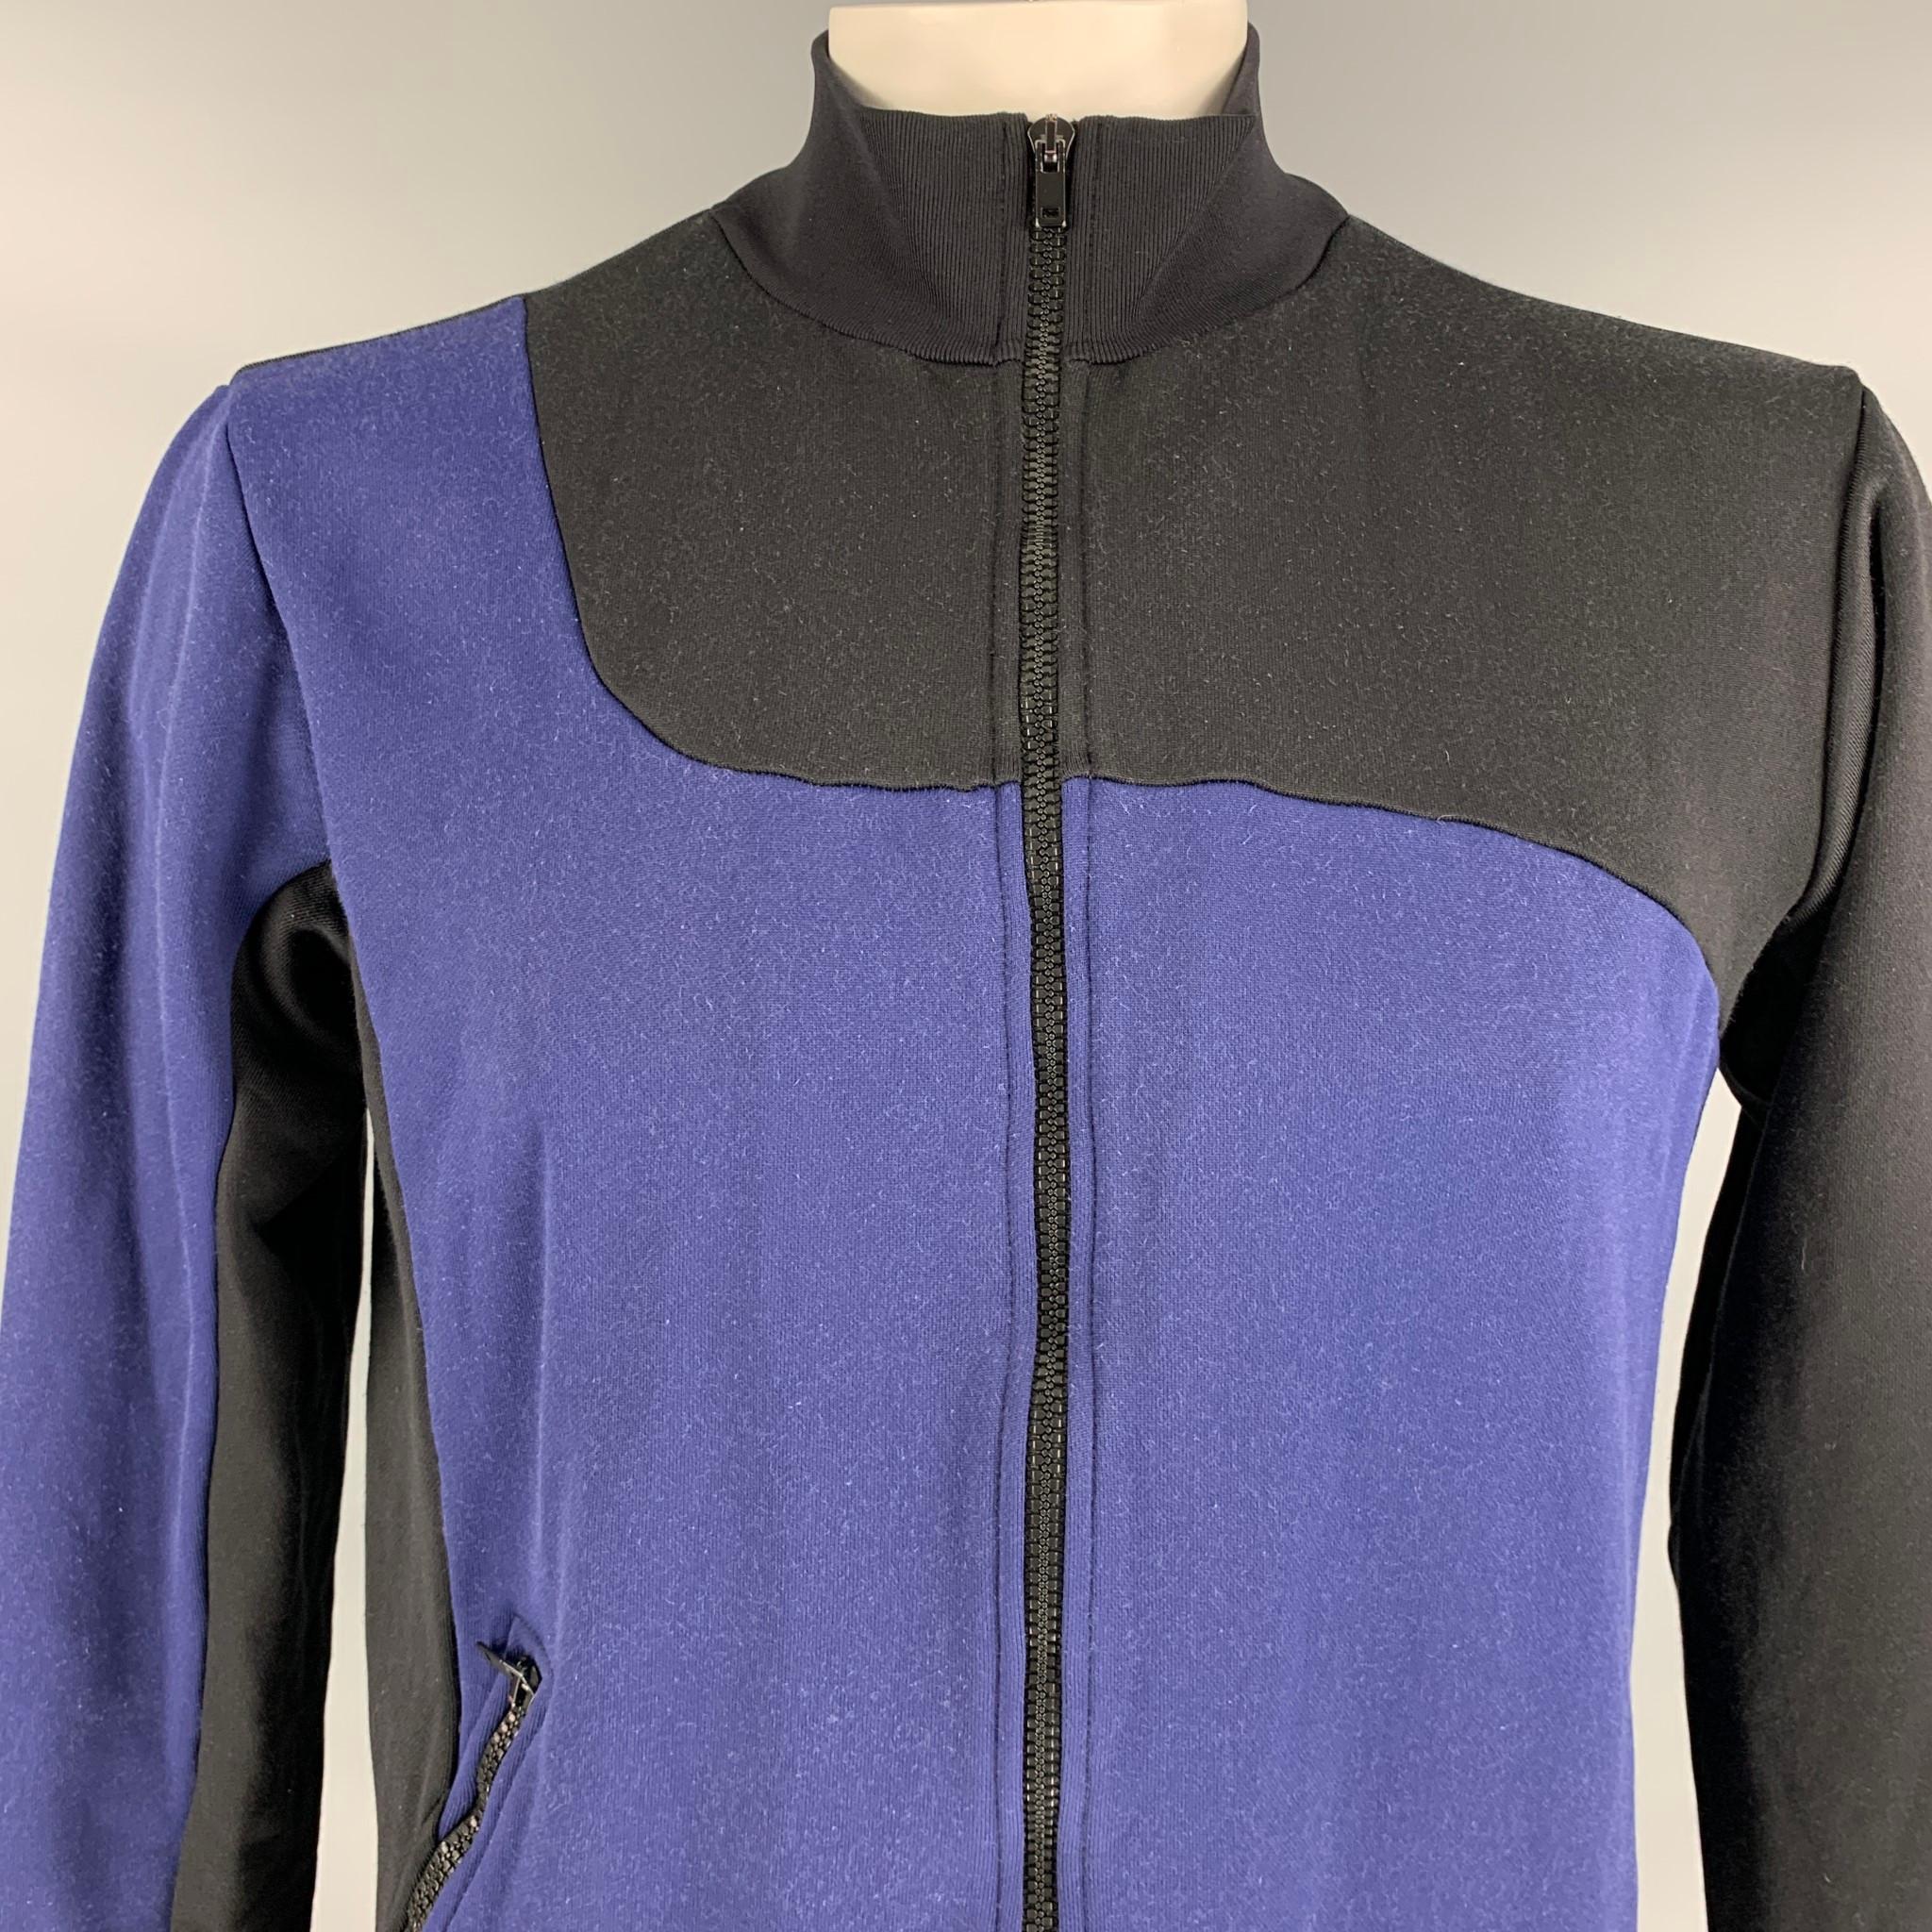 MAISON MARGIELA sweatshirt comes in a black & blue color block cotton / nylon featuring a high collar, zipper pocket, and a zip up closure. Made oin Italy. 

Good Pre-Owned Condition.
Marked: 52

Measurements:

Shoulder: 18.5 in.
Chest: 42